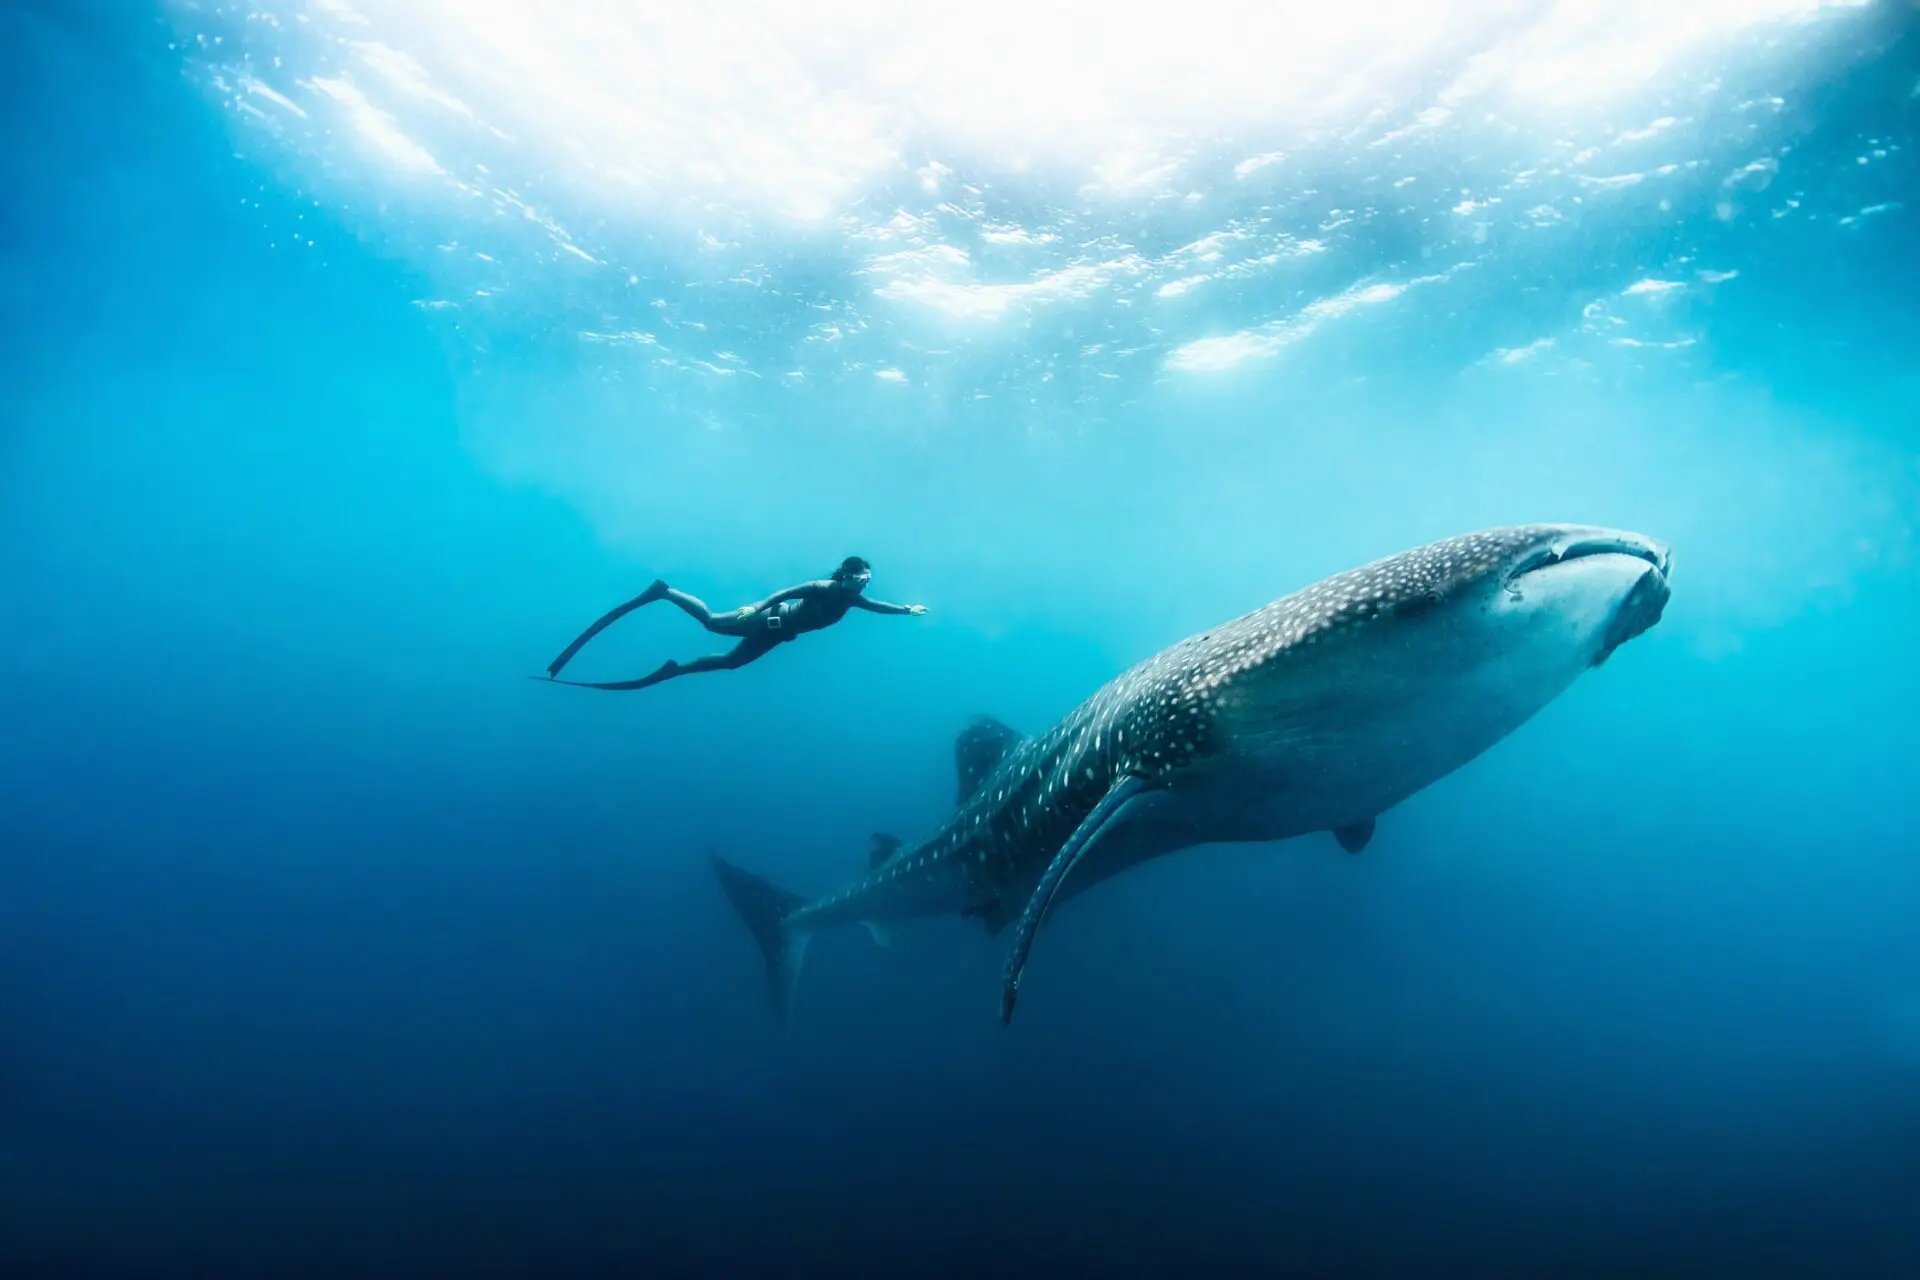 diver swimming next to whale shark